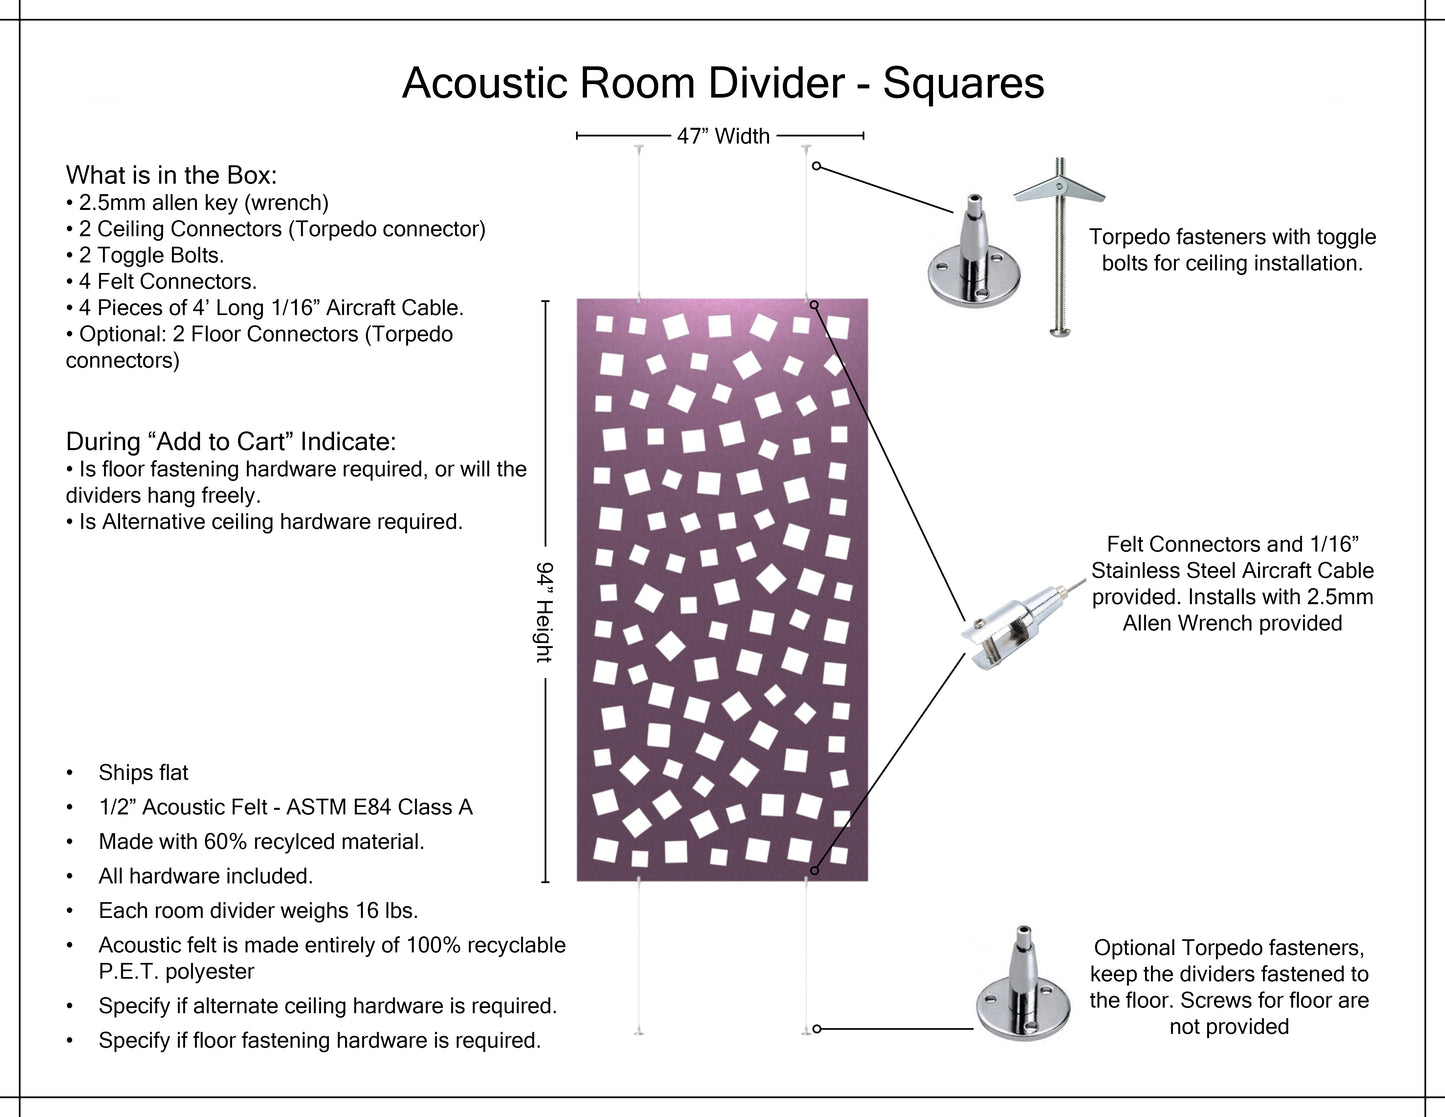 4x8 Acoustic Room Divider - Squares